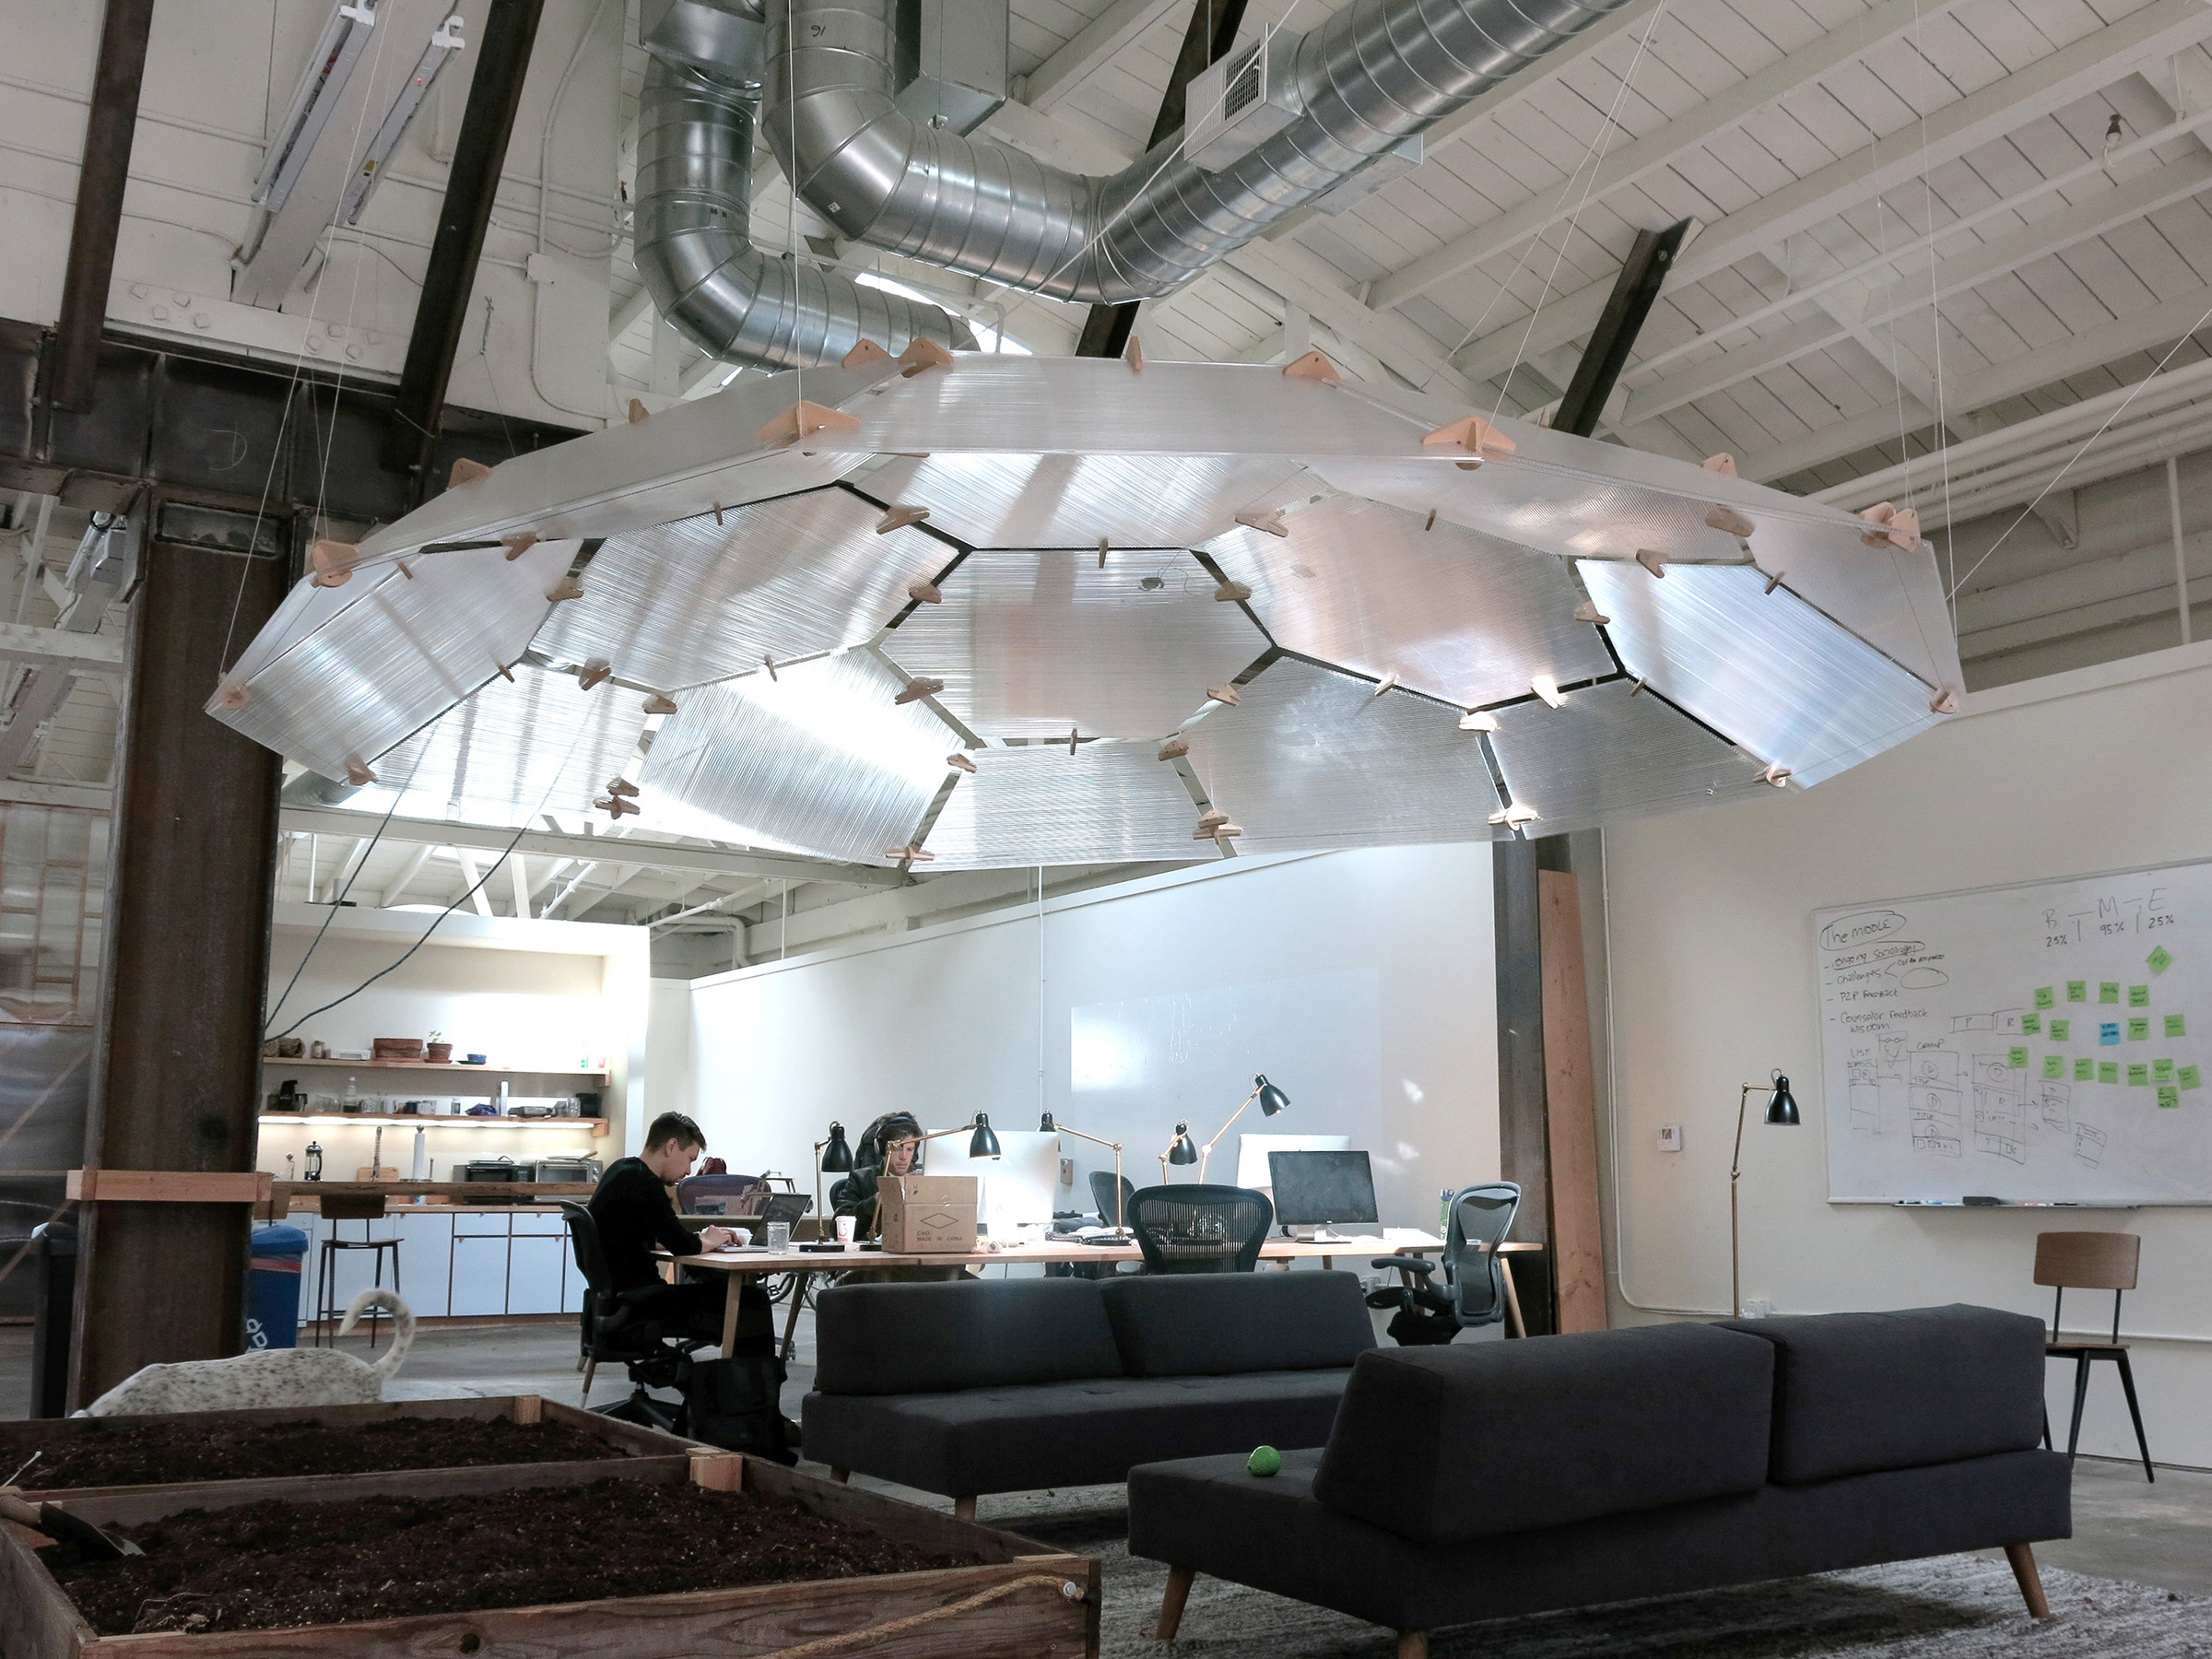 The sound dome at DIY Headquarters